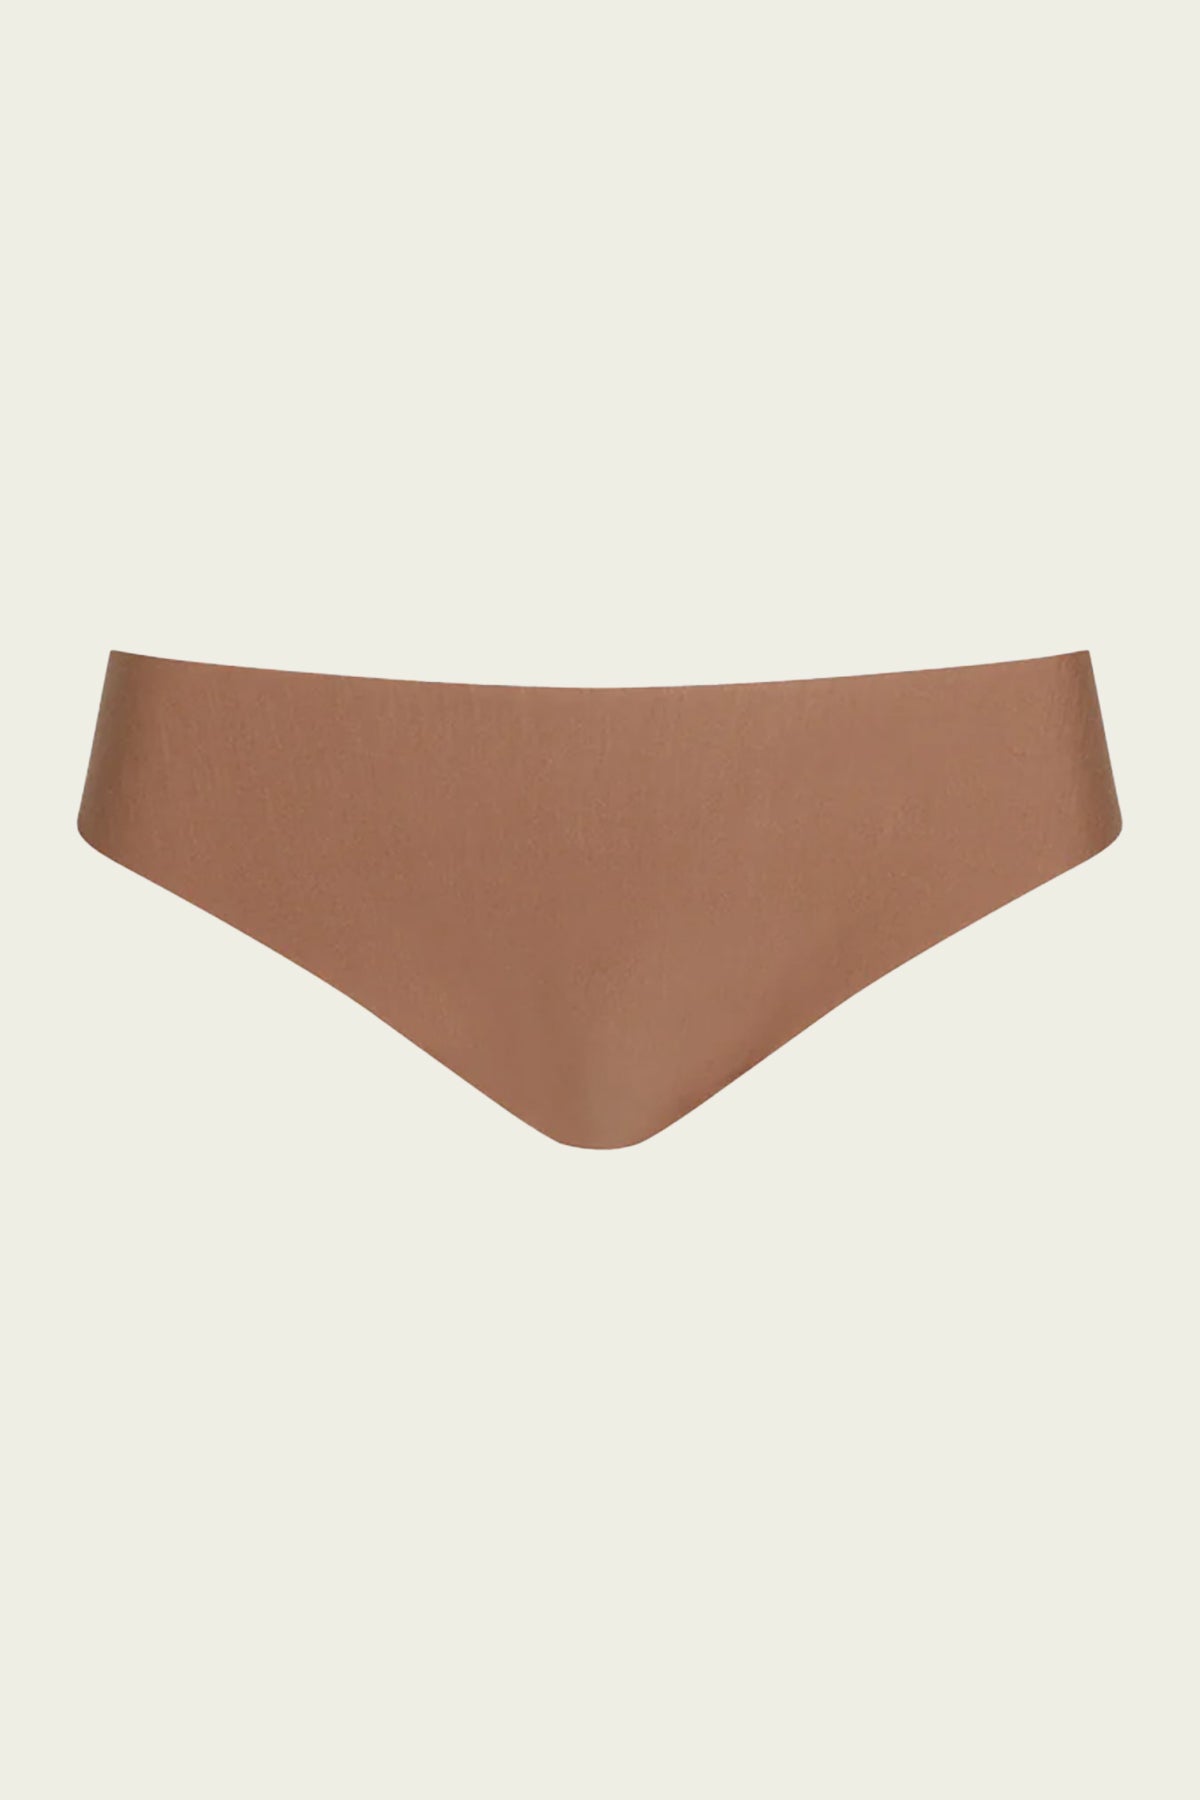 Butter Mid-Rise Thong in Toffee - shop-olivia.com